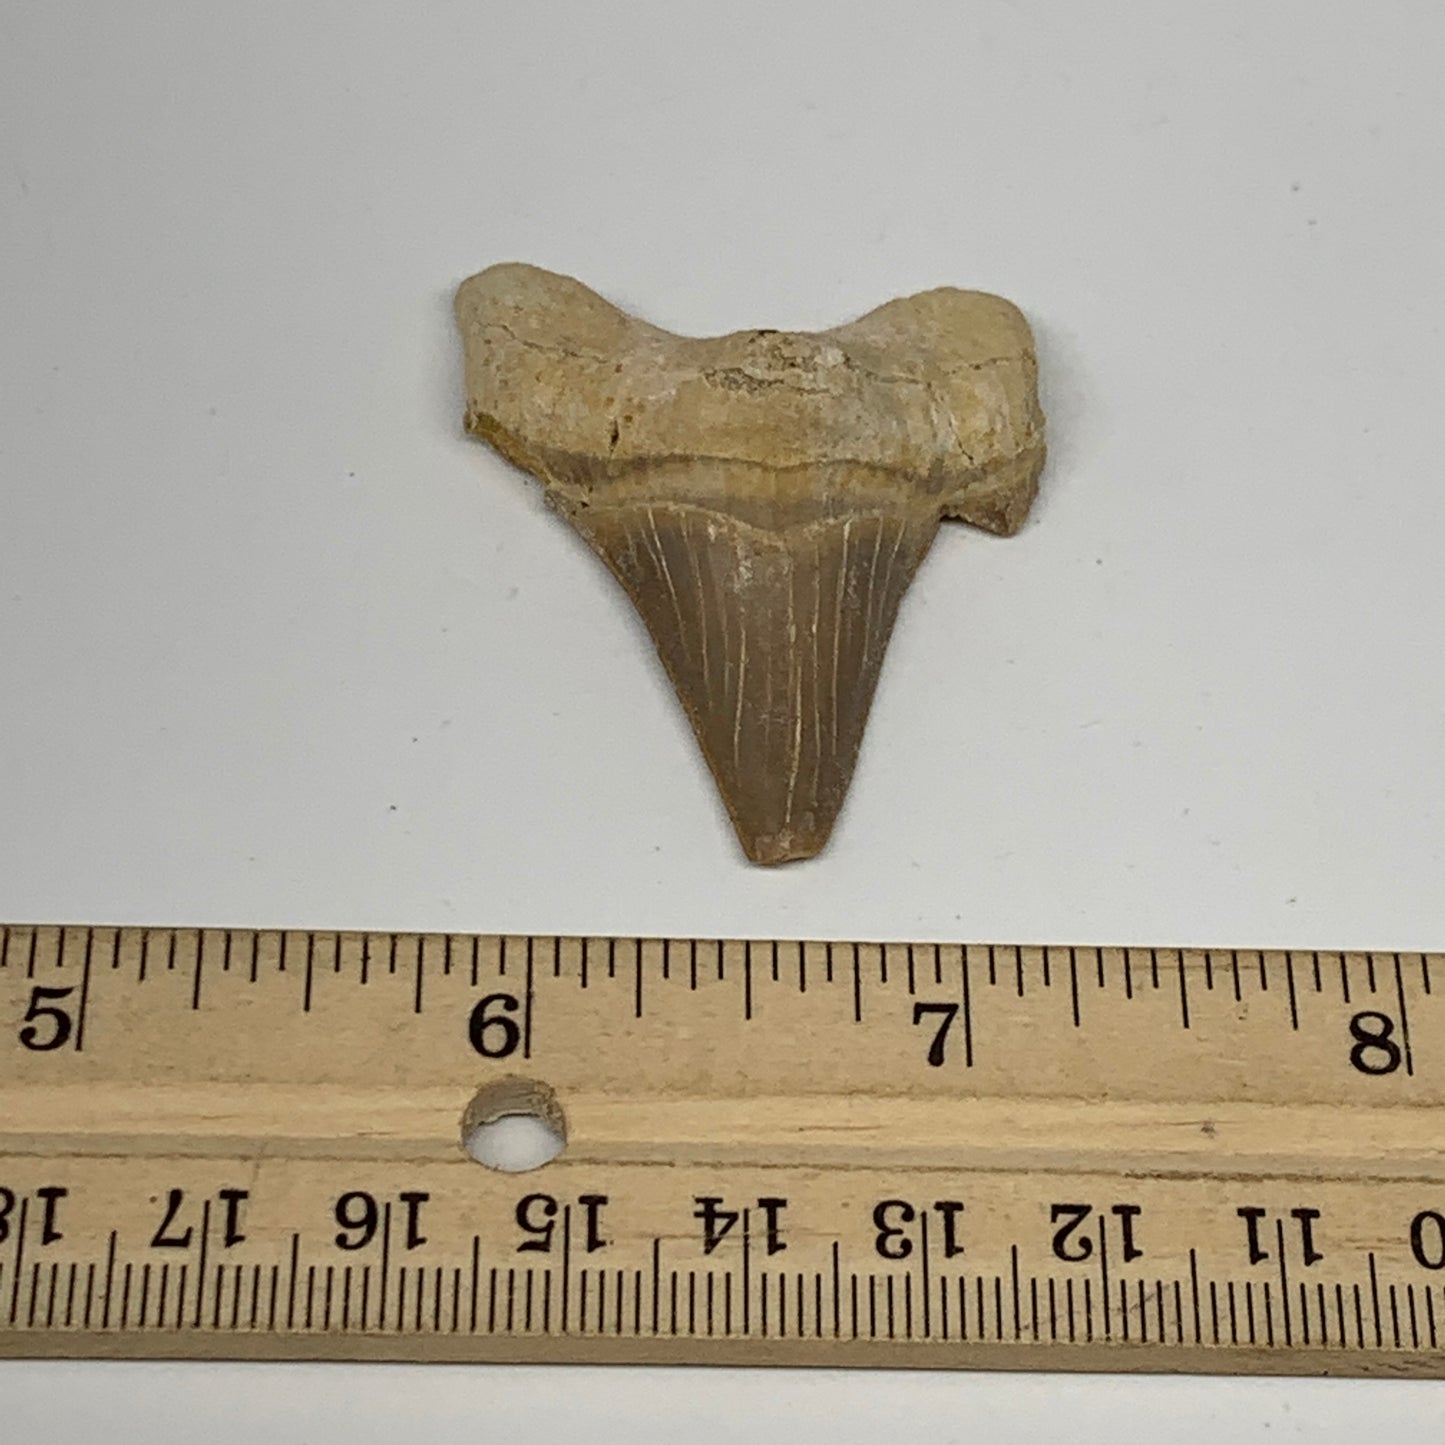 13g, 1.9"X 1.5"x 0.5" Natural Fossils Fish Shark Tooth @Morocco, B12642